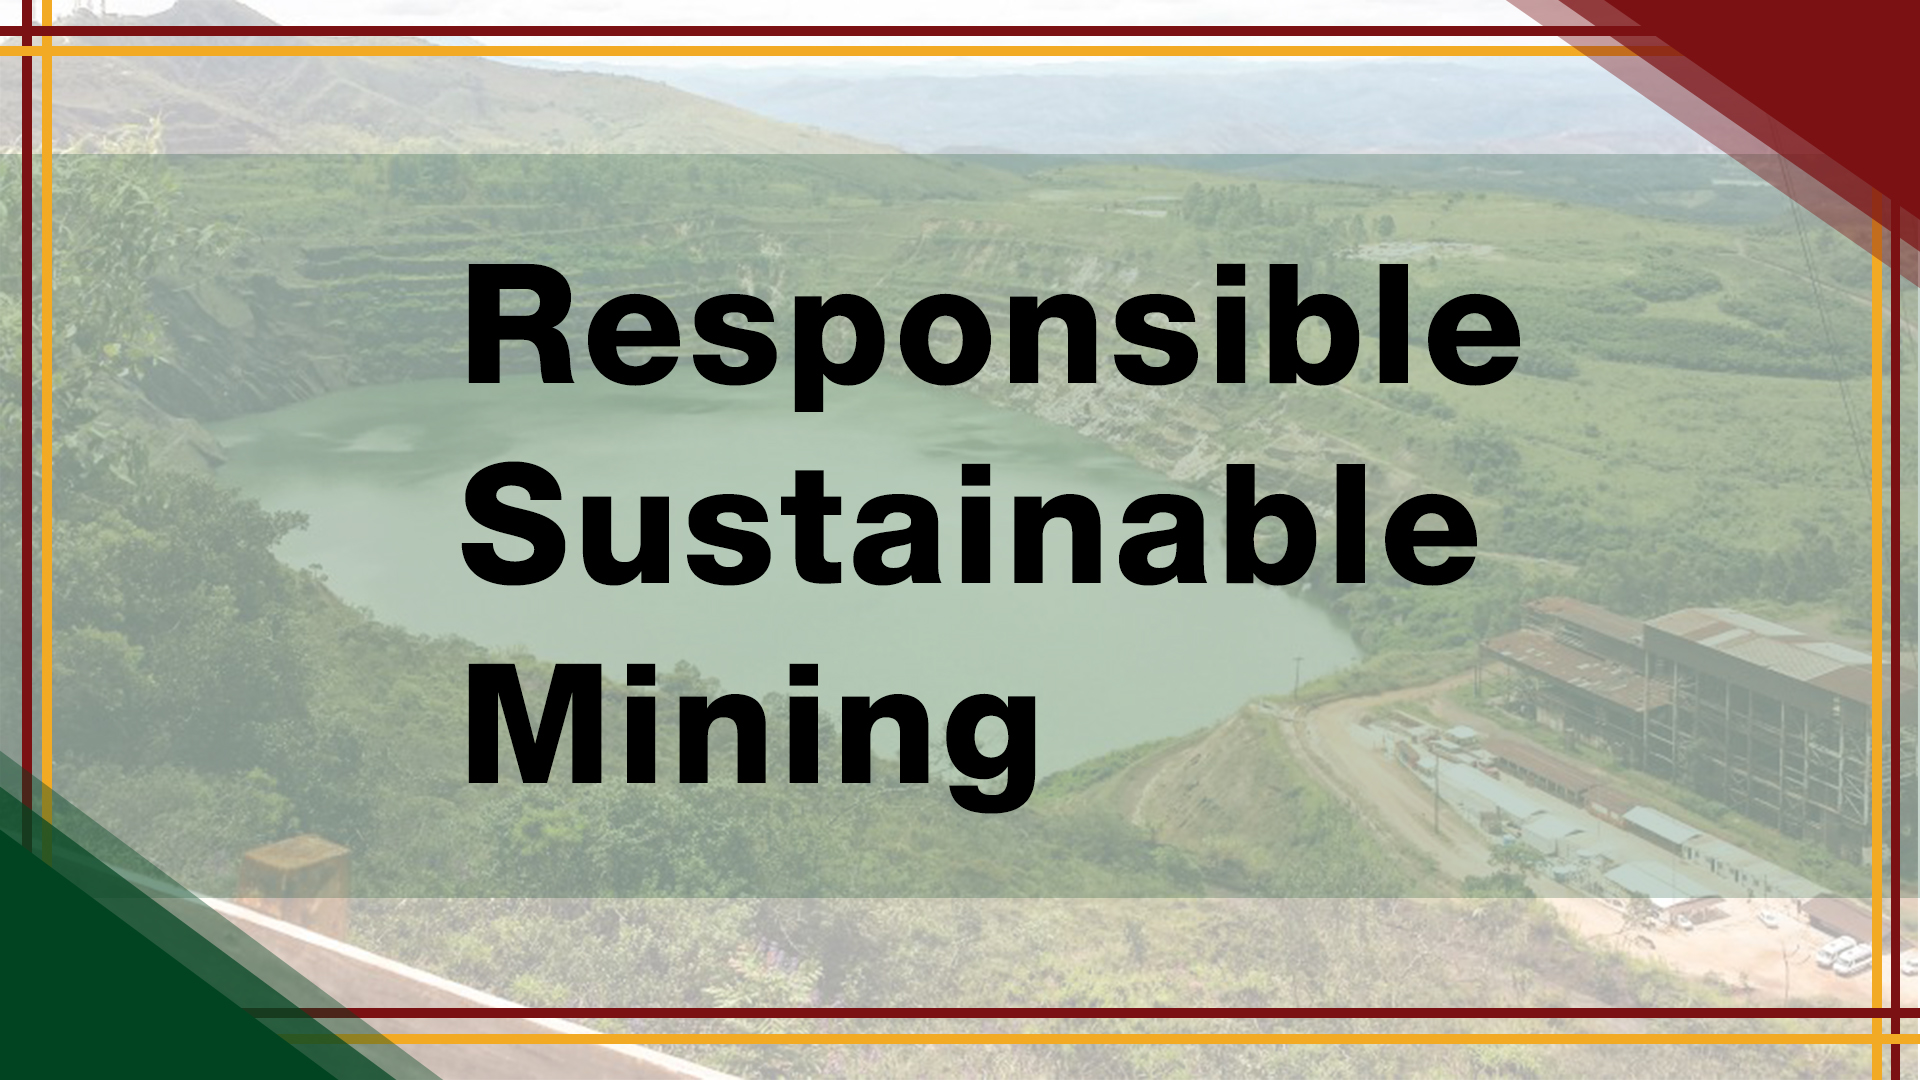 SCIENCE INNOVATIONS | Episode 04: Responsible Sustainable Mining